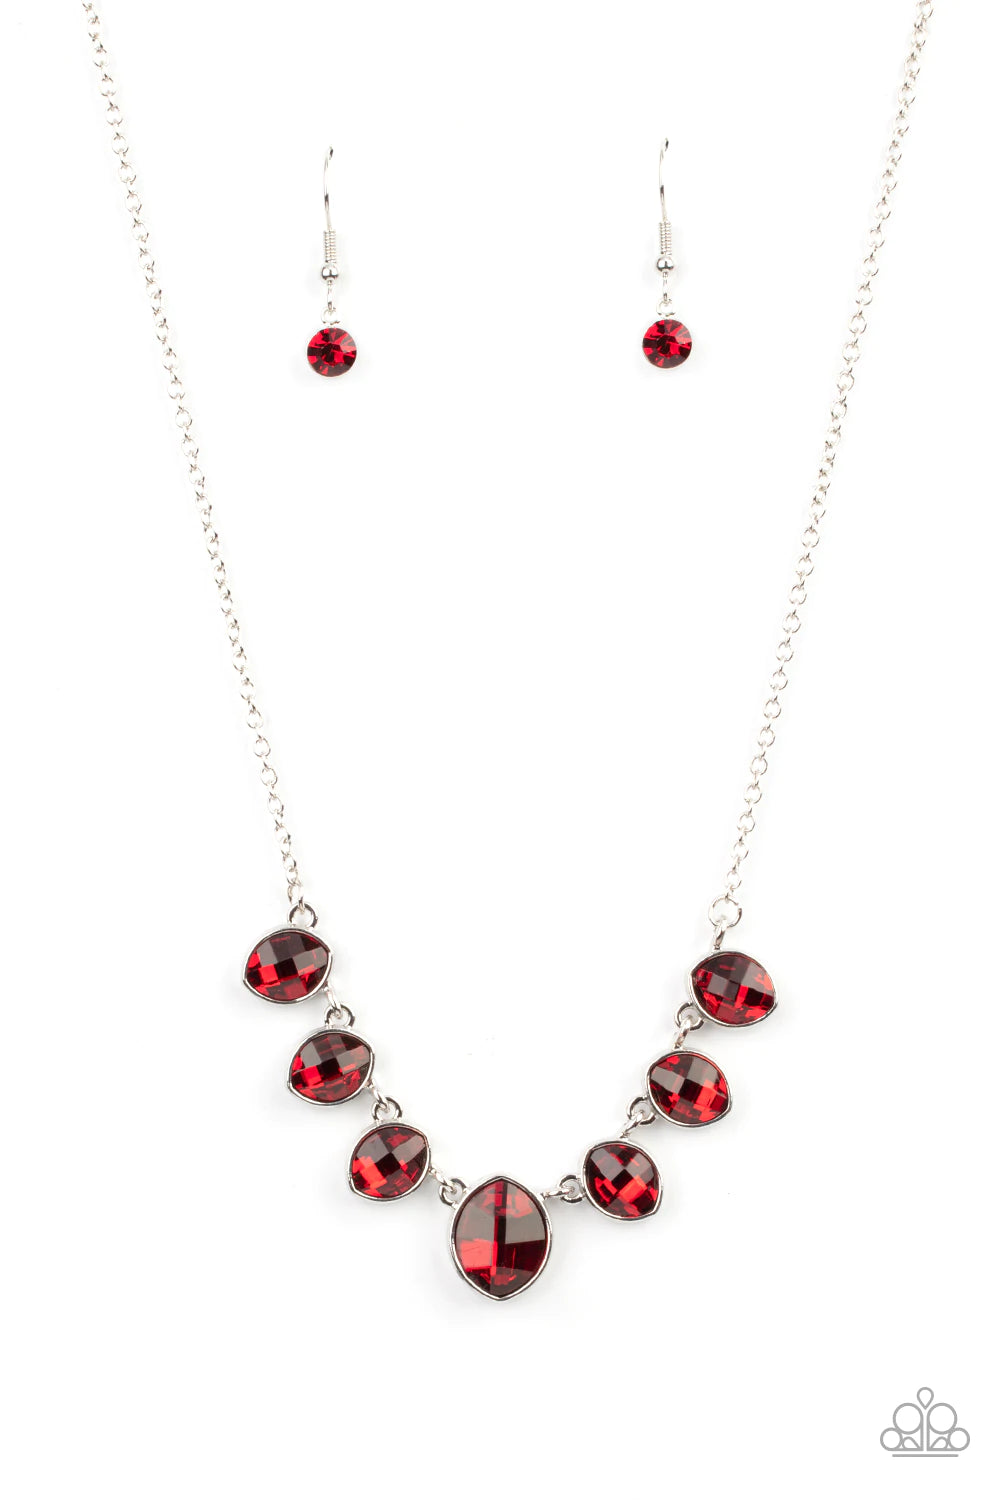 Material Girl Glamour ♥ Red  Necklace ♥ Paparazzi Accessories - GlaMarous Titi Jewels